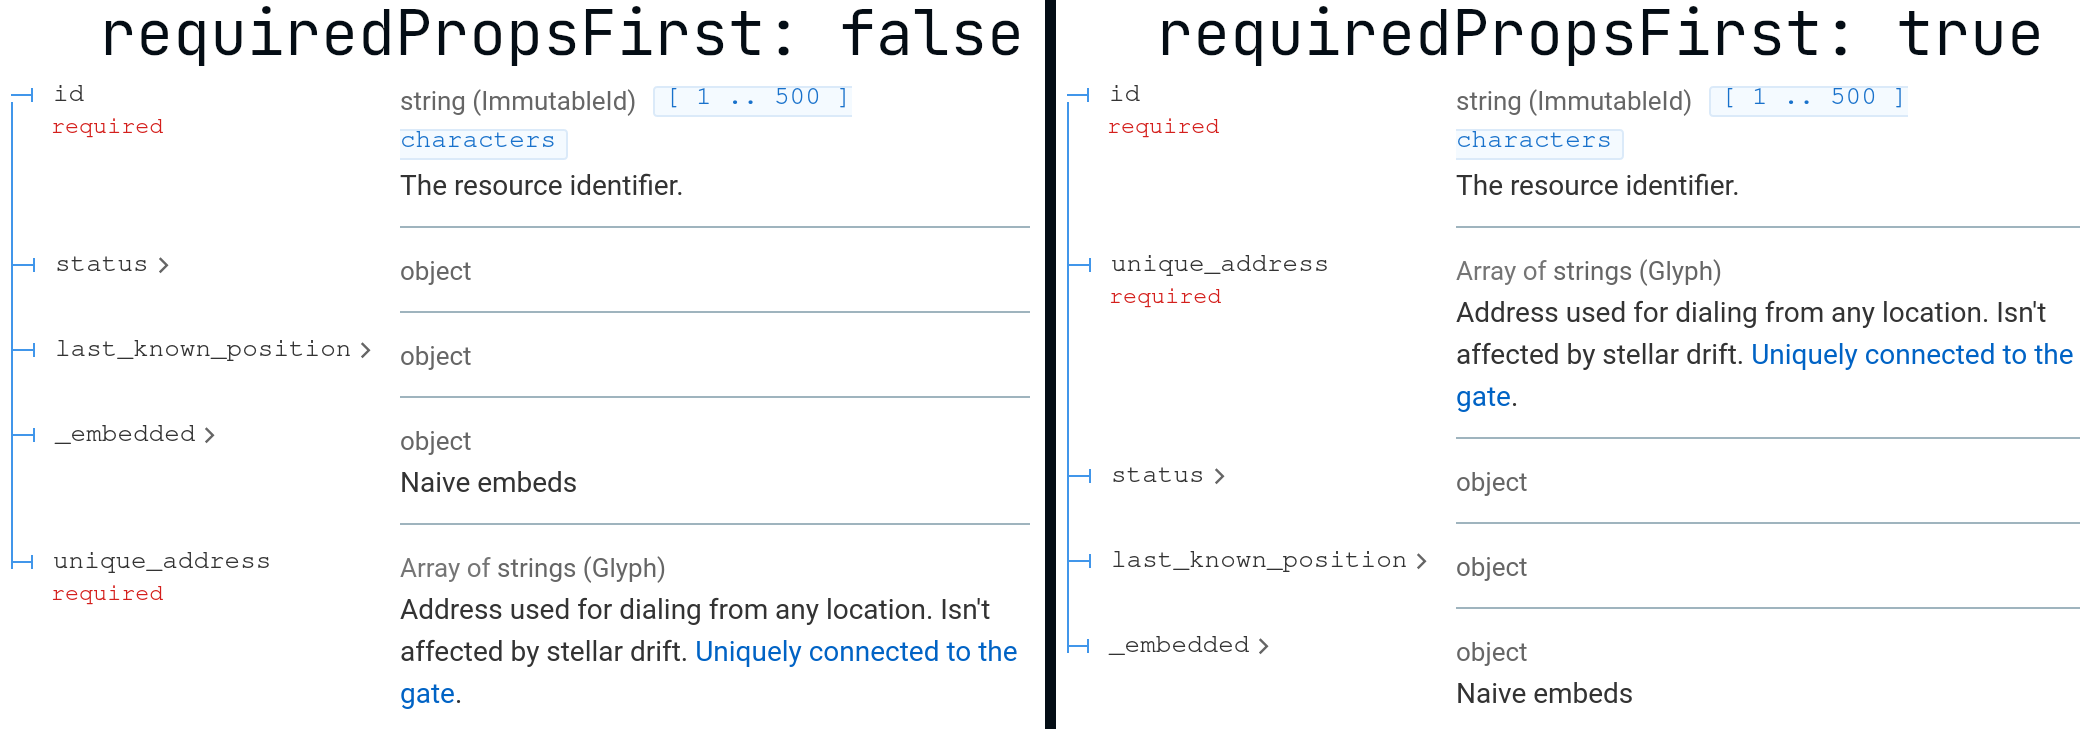 Comparison of property display with requiredPropsFirst equal to false or true